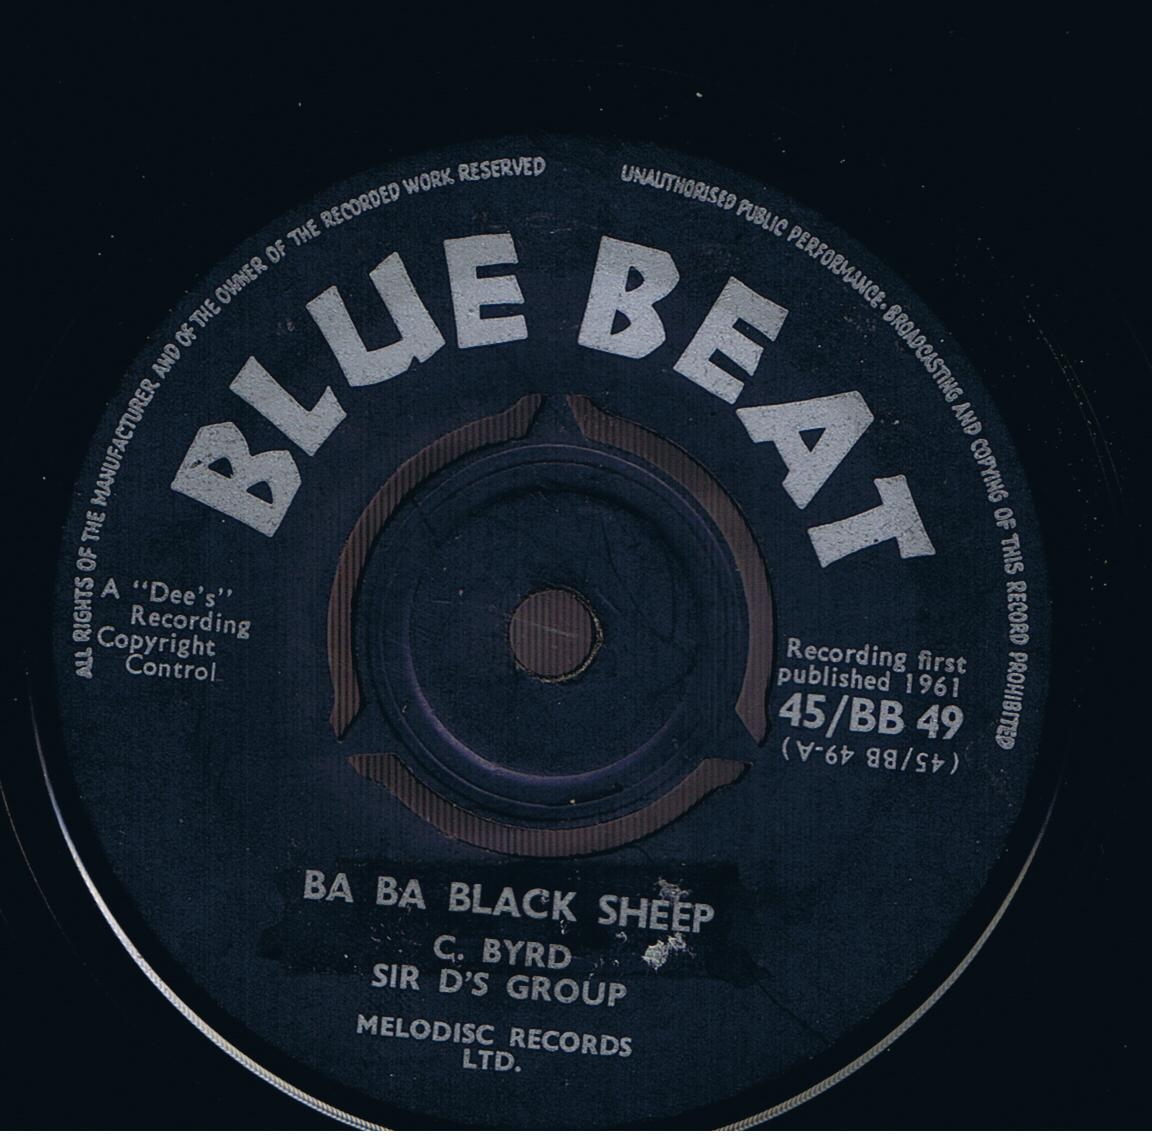 C. Byrd & Sir D's Group - Ba Ba Black Sheep / Lloyd And Cecil & Sir D's Group - Come Over Here (Original 7")